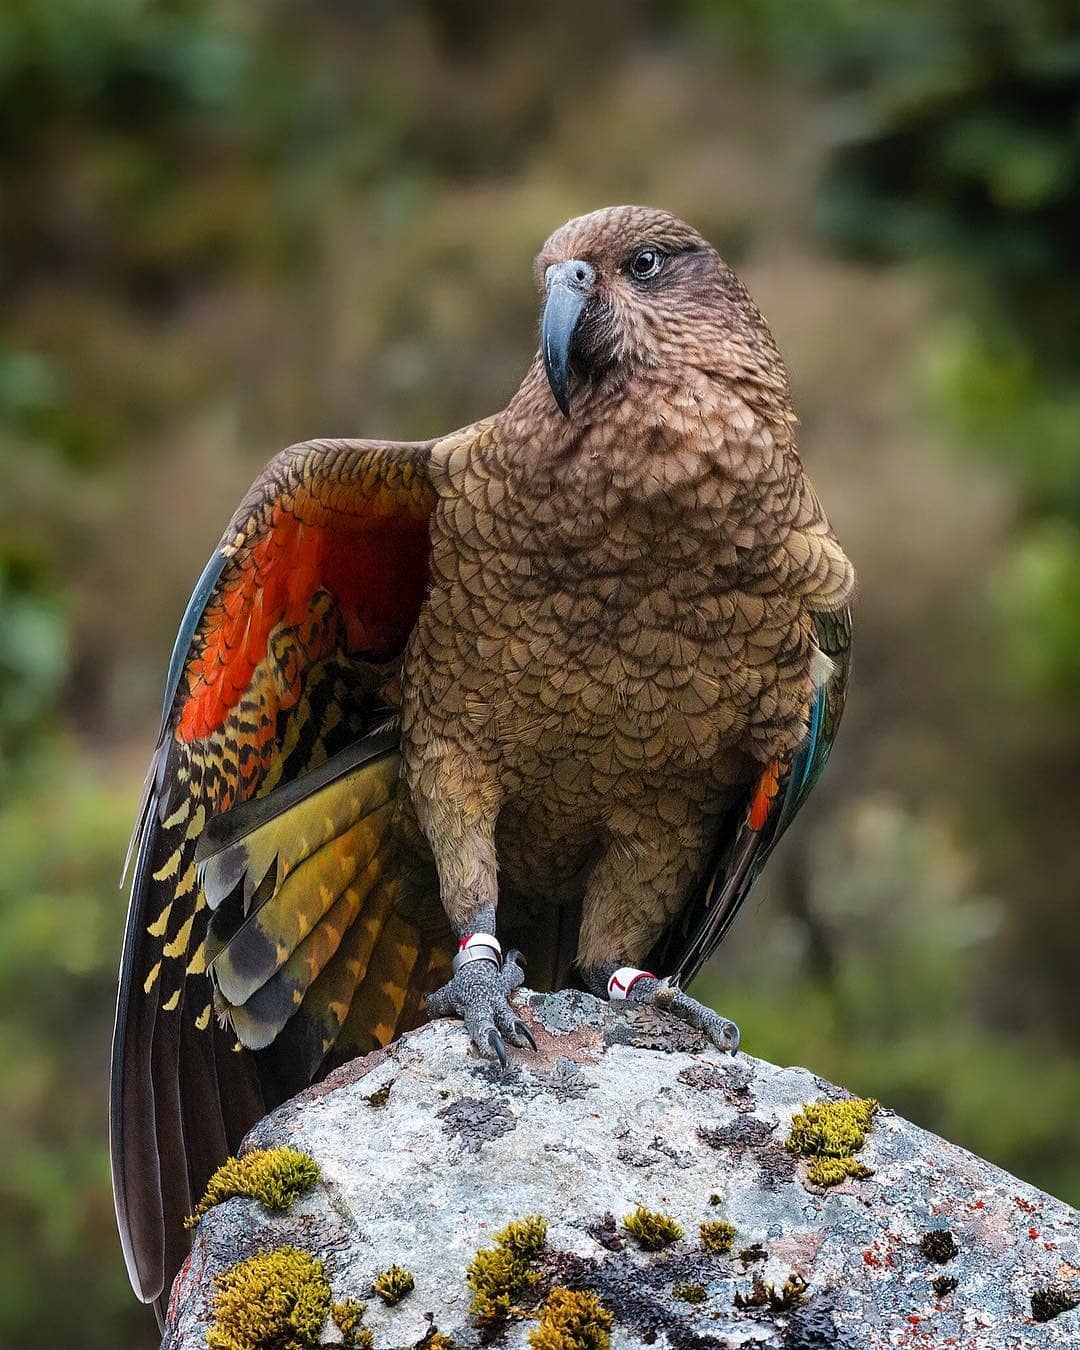 Wild kea exist only in the South Island of New Zealand in and around the alpine areas. They nest in the beech forests at sea level on the West Coast of the South Island, in the mountain forests along the Southern Alps (as far north as Kahurangi National Park and as far south as Fiordland) and are also in the mountains as far east as Kaikoura.